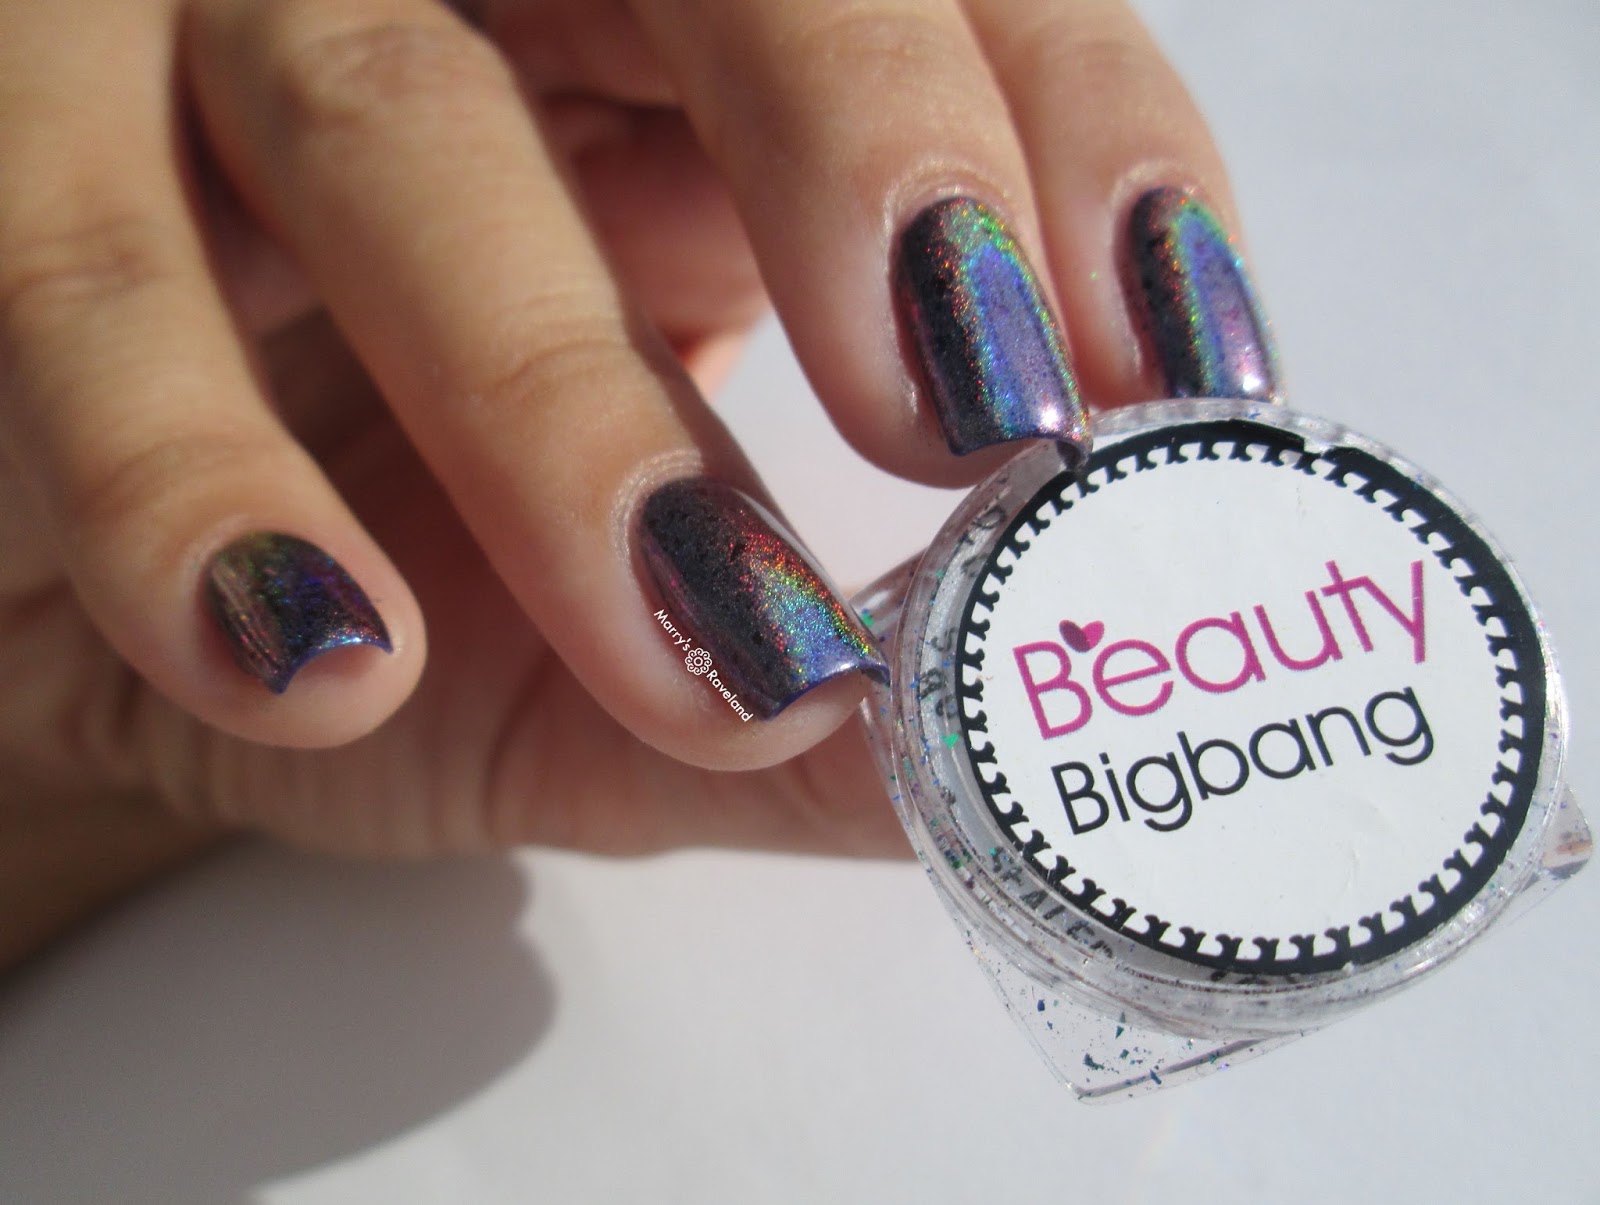 Chameleon Holographic Nail Art Flakes - wide 7